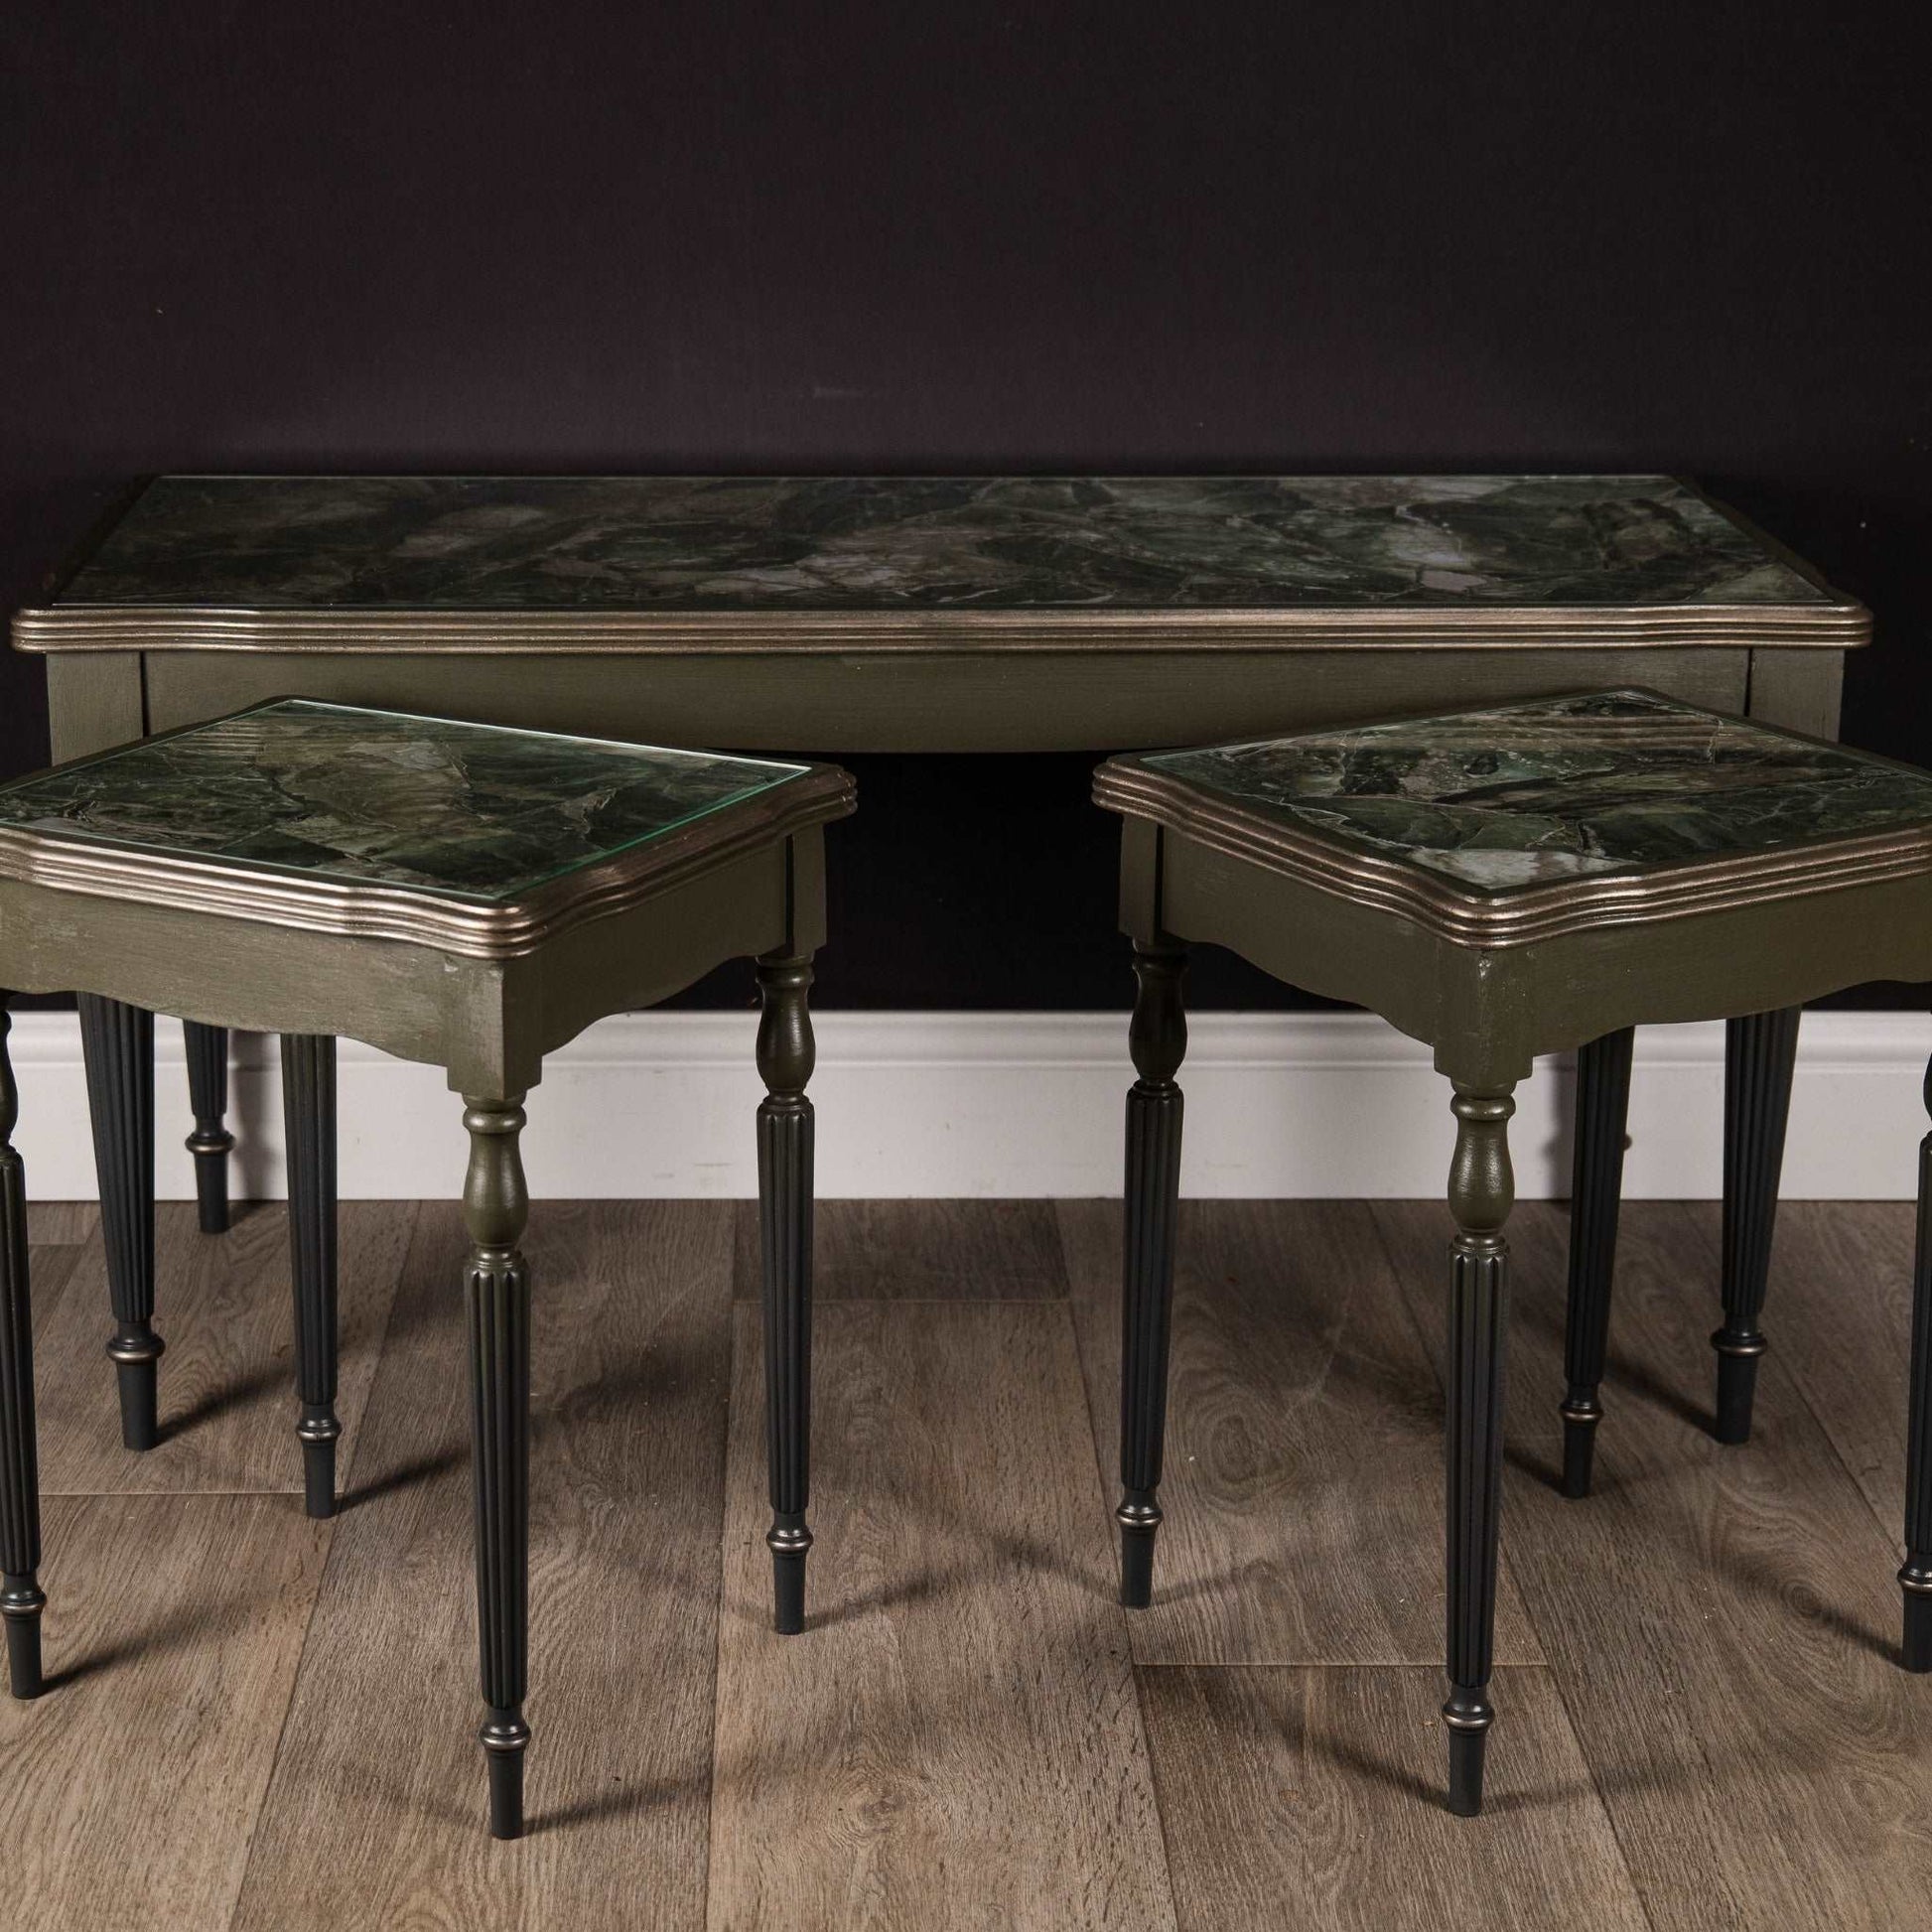 Vintage Green Nesting Coffee Tables, glass top, marble pattern